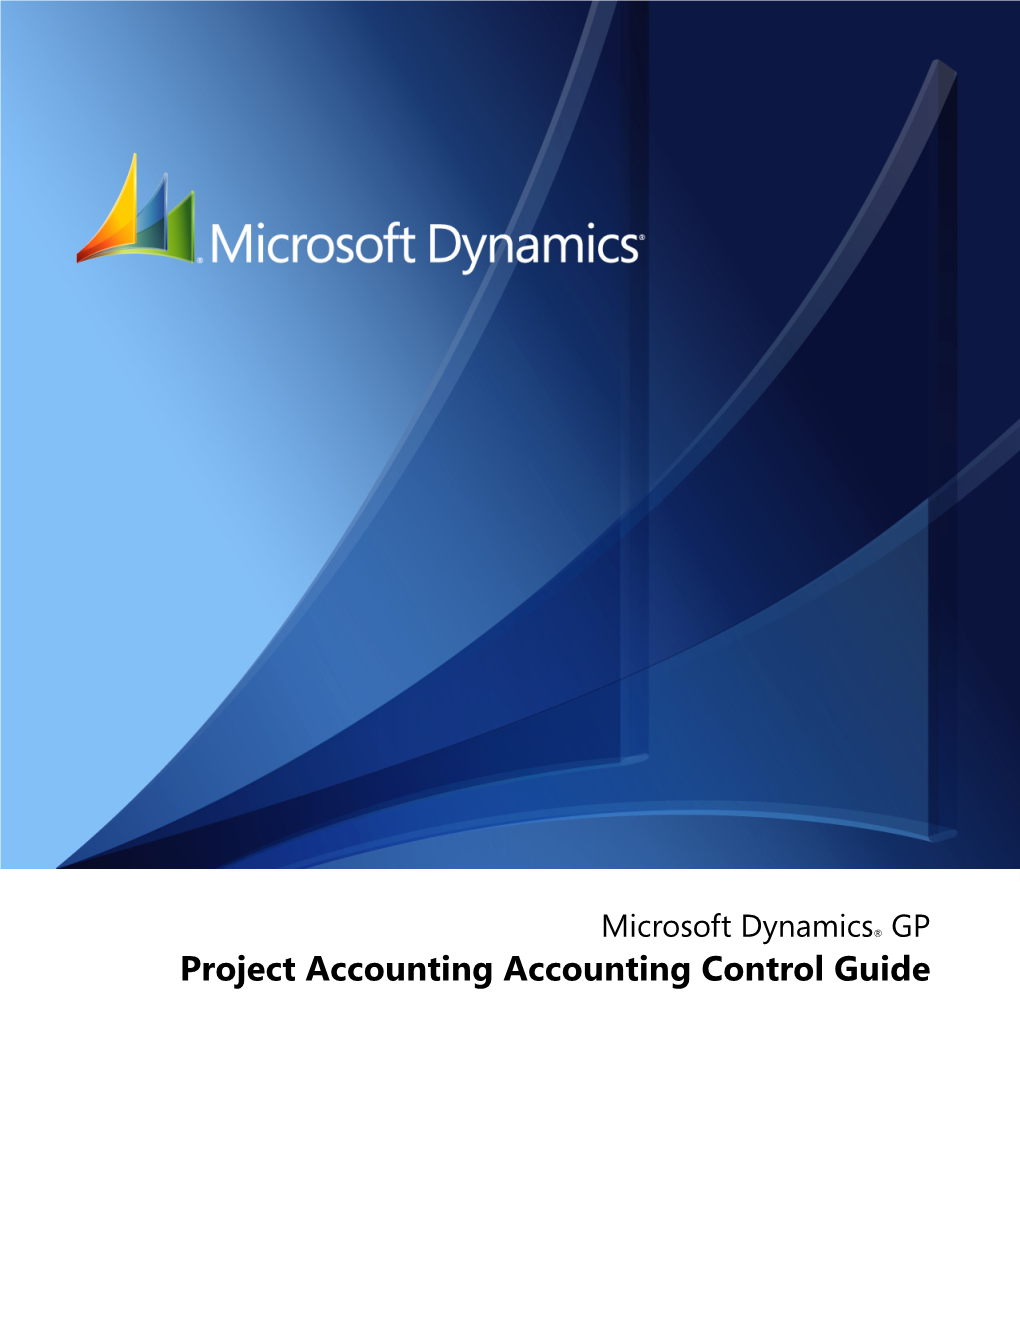 Project Accounting Accounting Control Guide Copyright Copyright © 2010 Microsoft